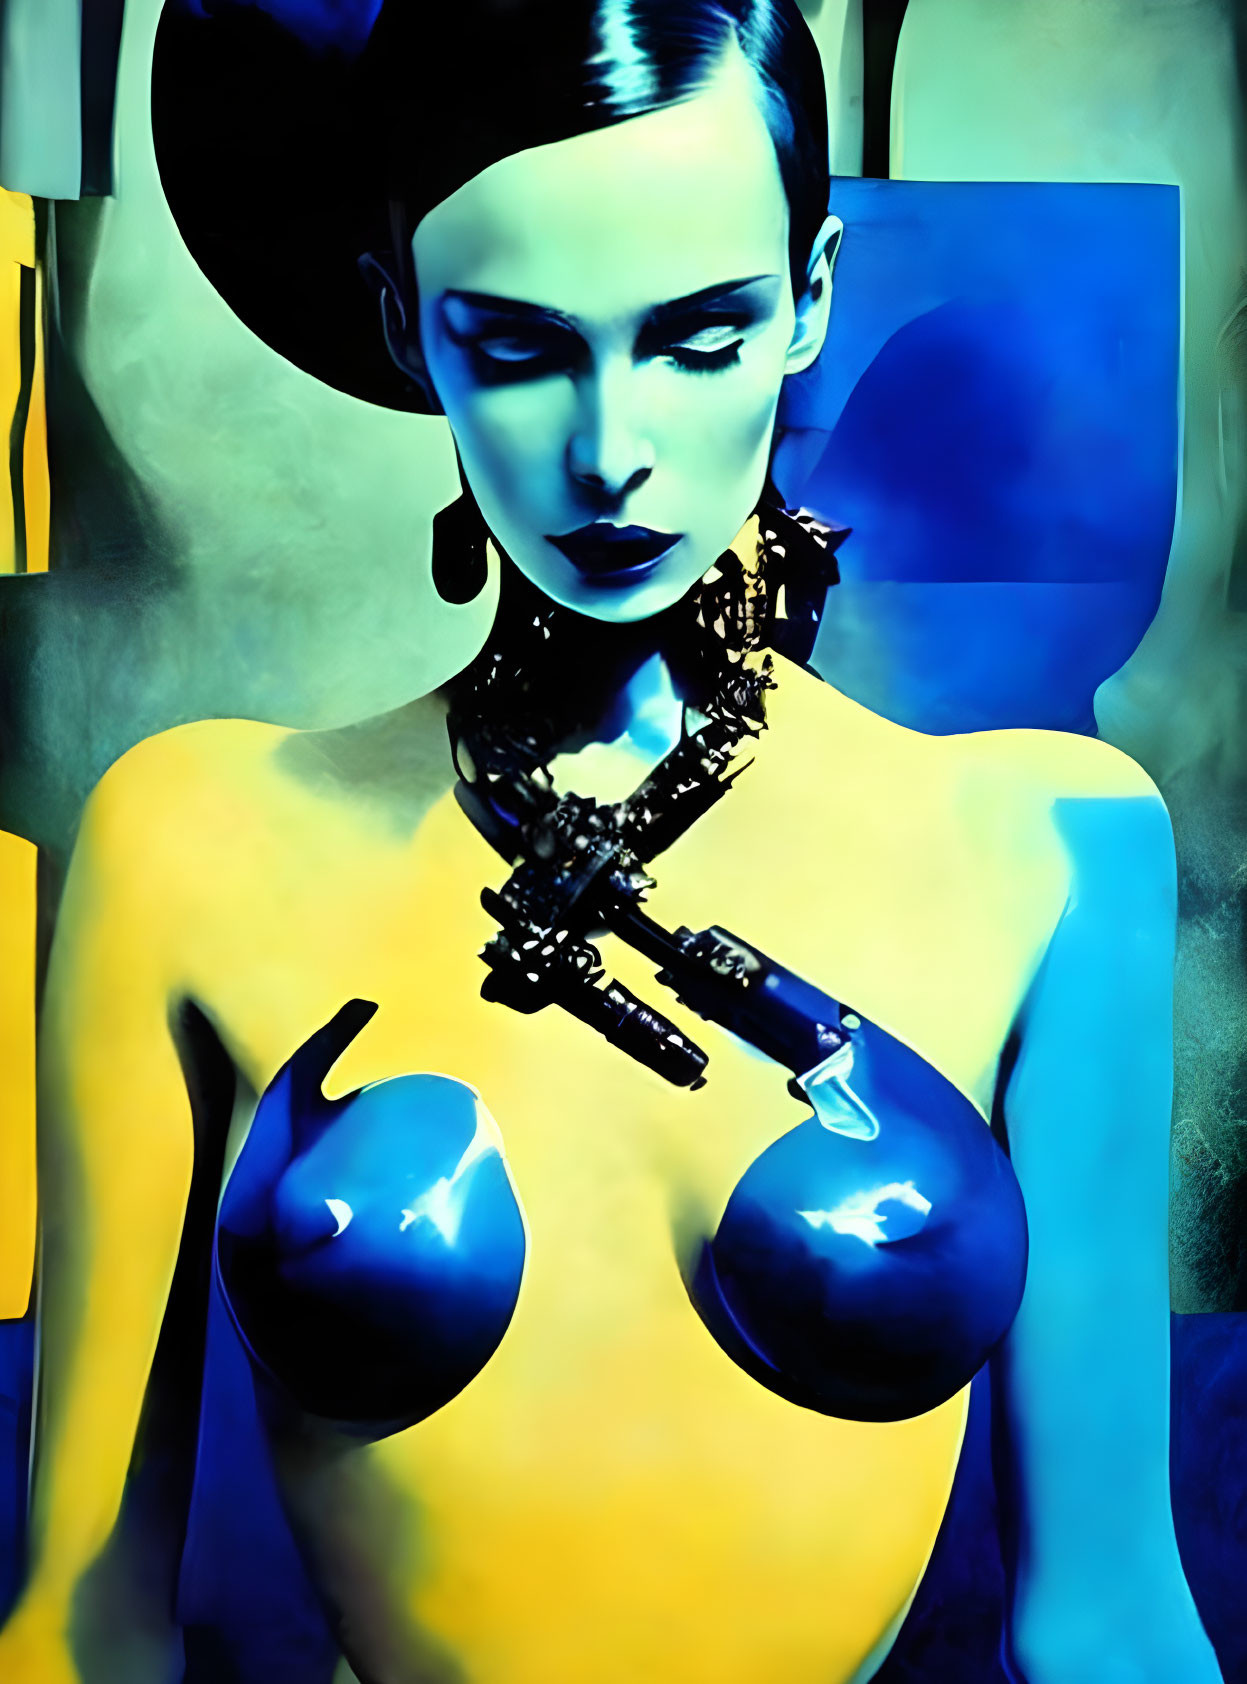 Fashion Photography in Extravagant Colors - I